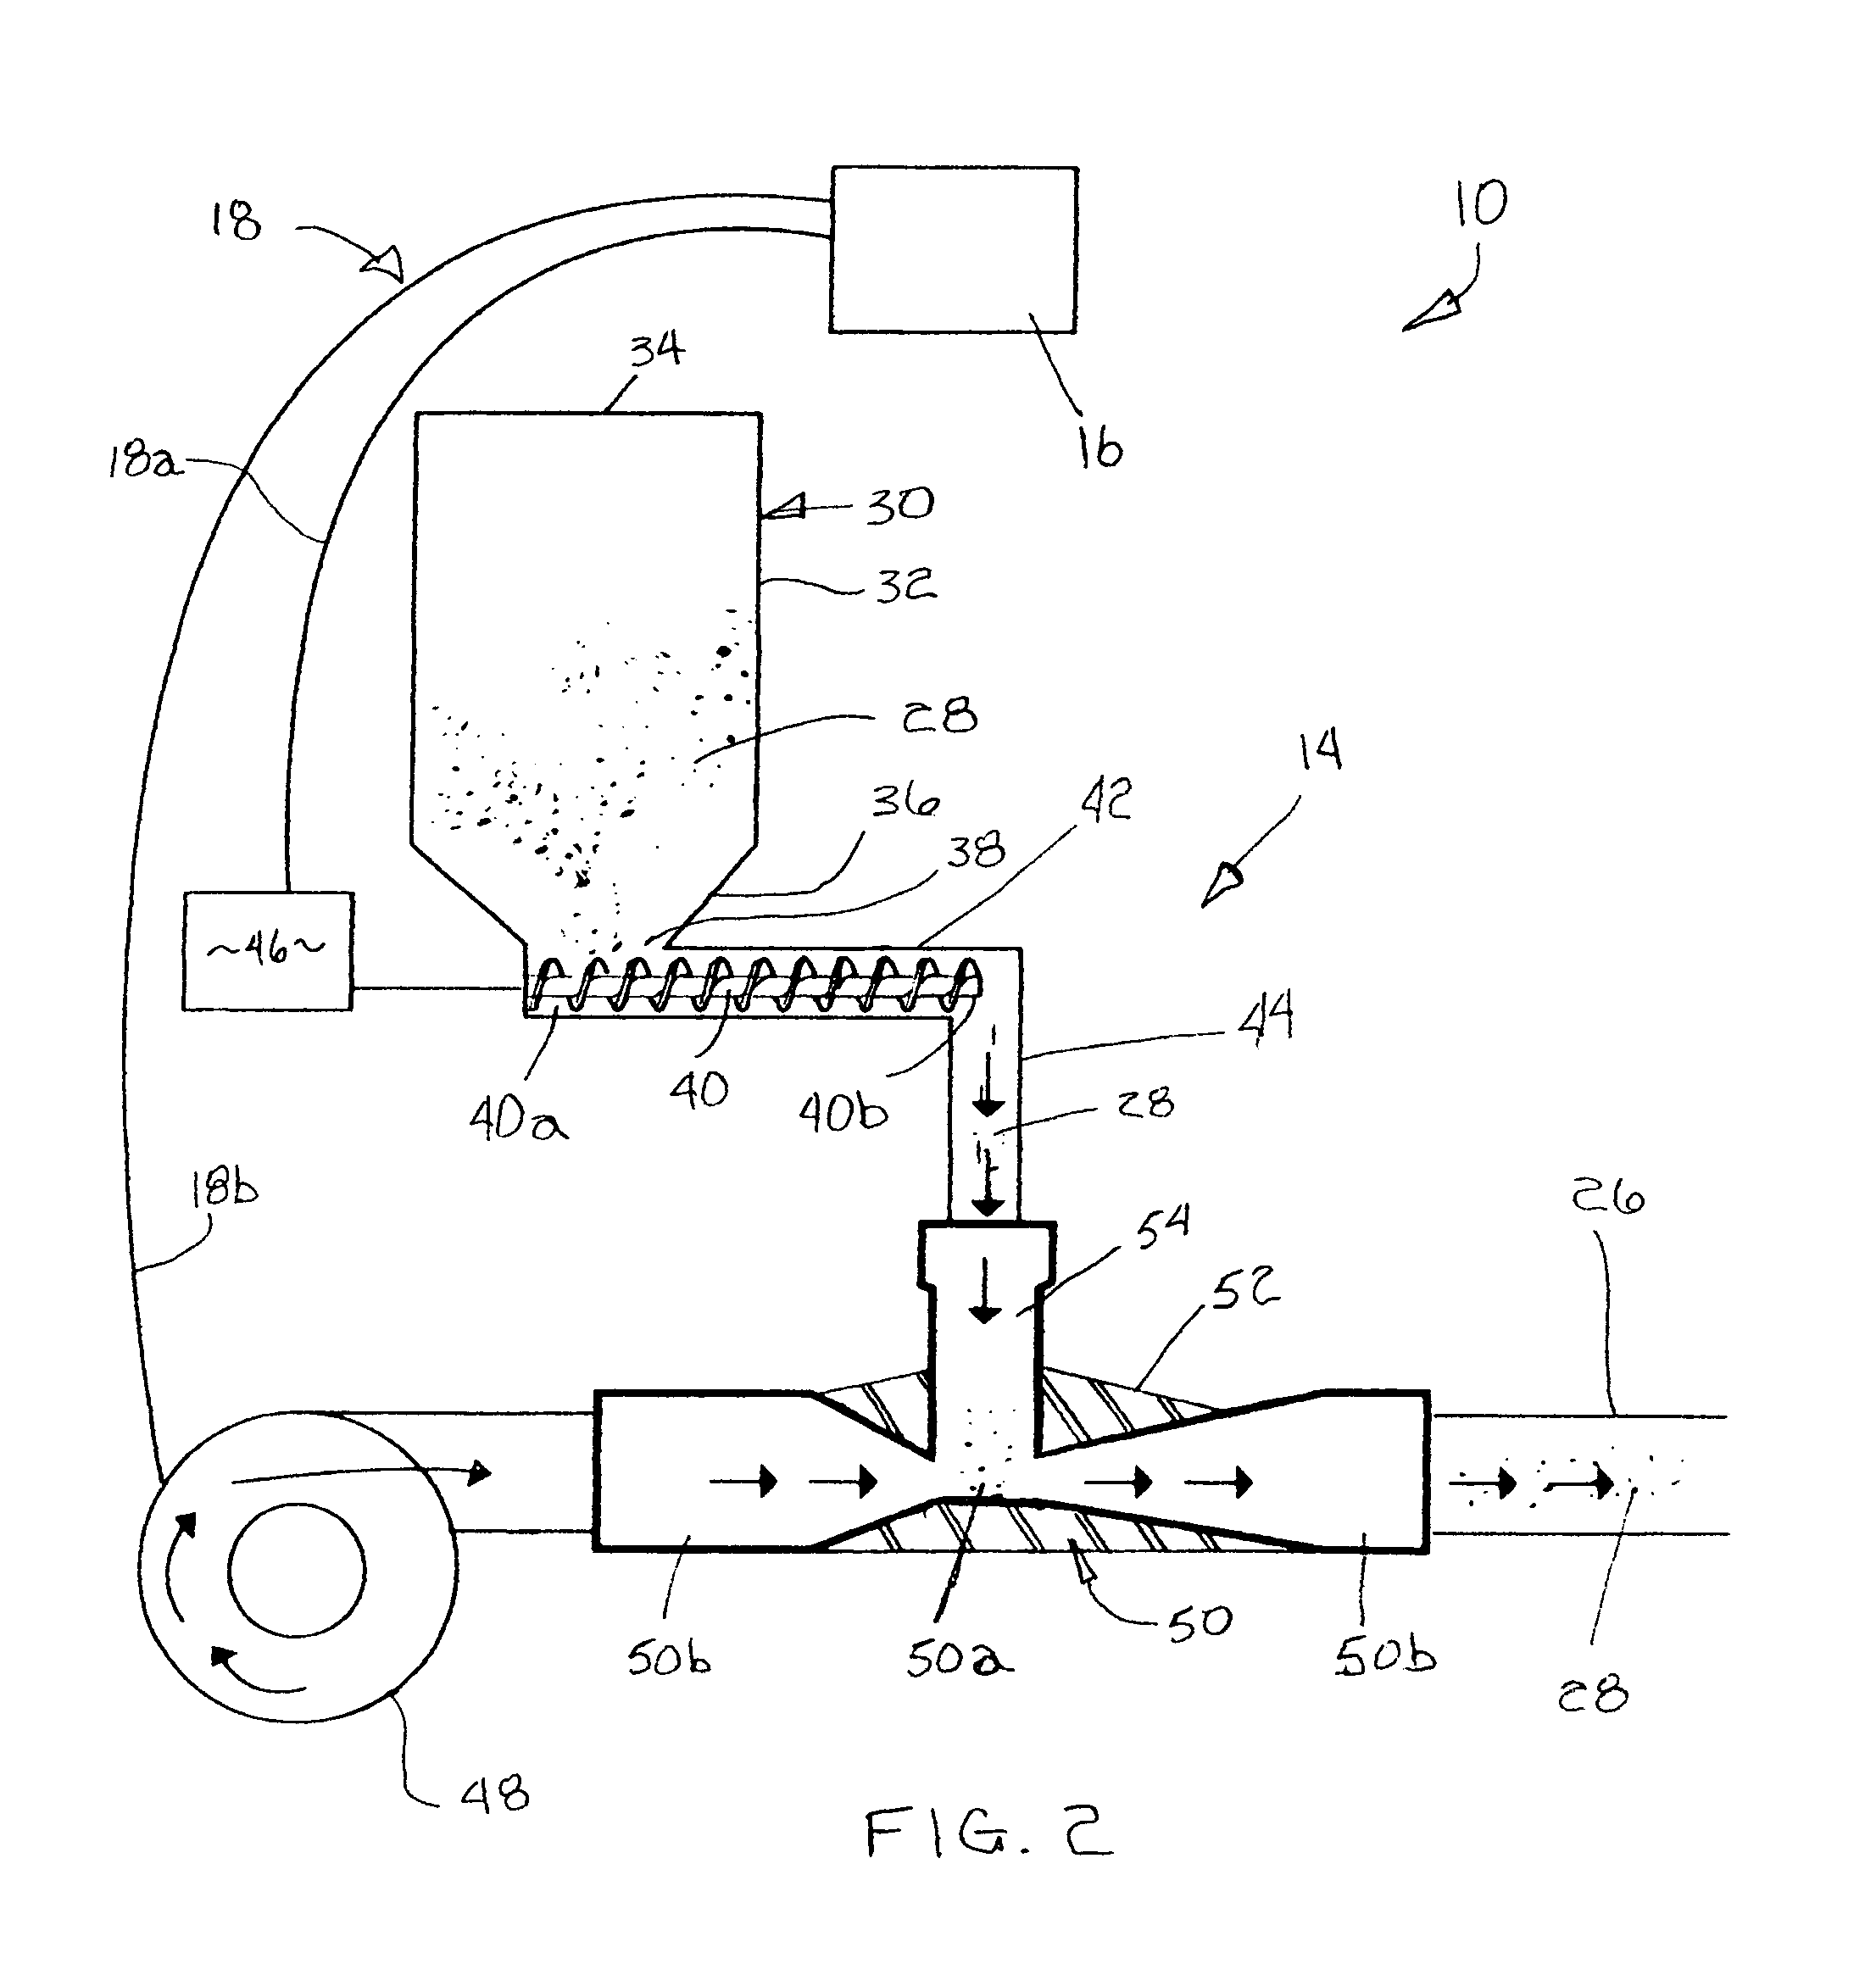 Apparatus and method for applying dry inoculant to forage material